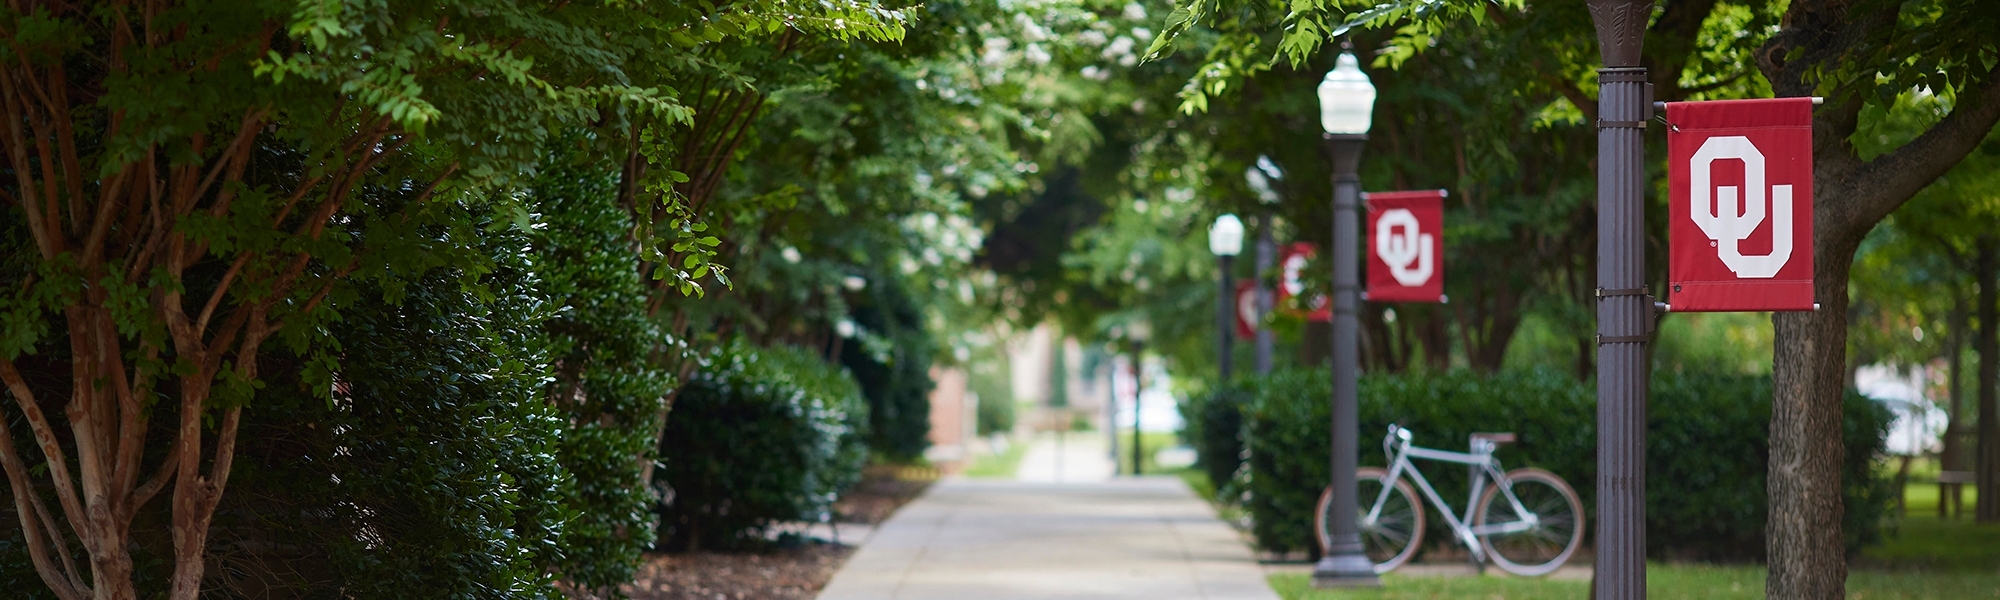 A walkway surrounded by trees and lampposts with OU flags in Norman, Oklahoma.